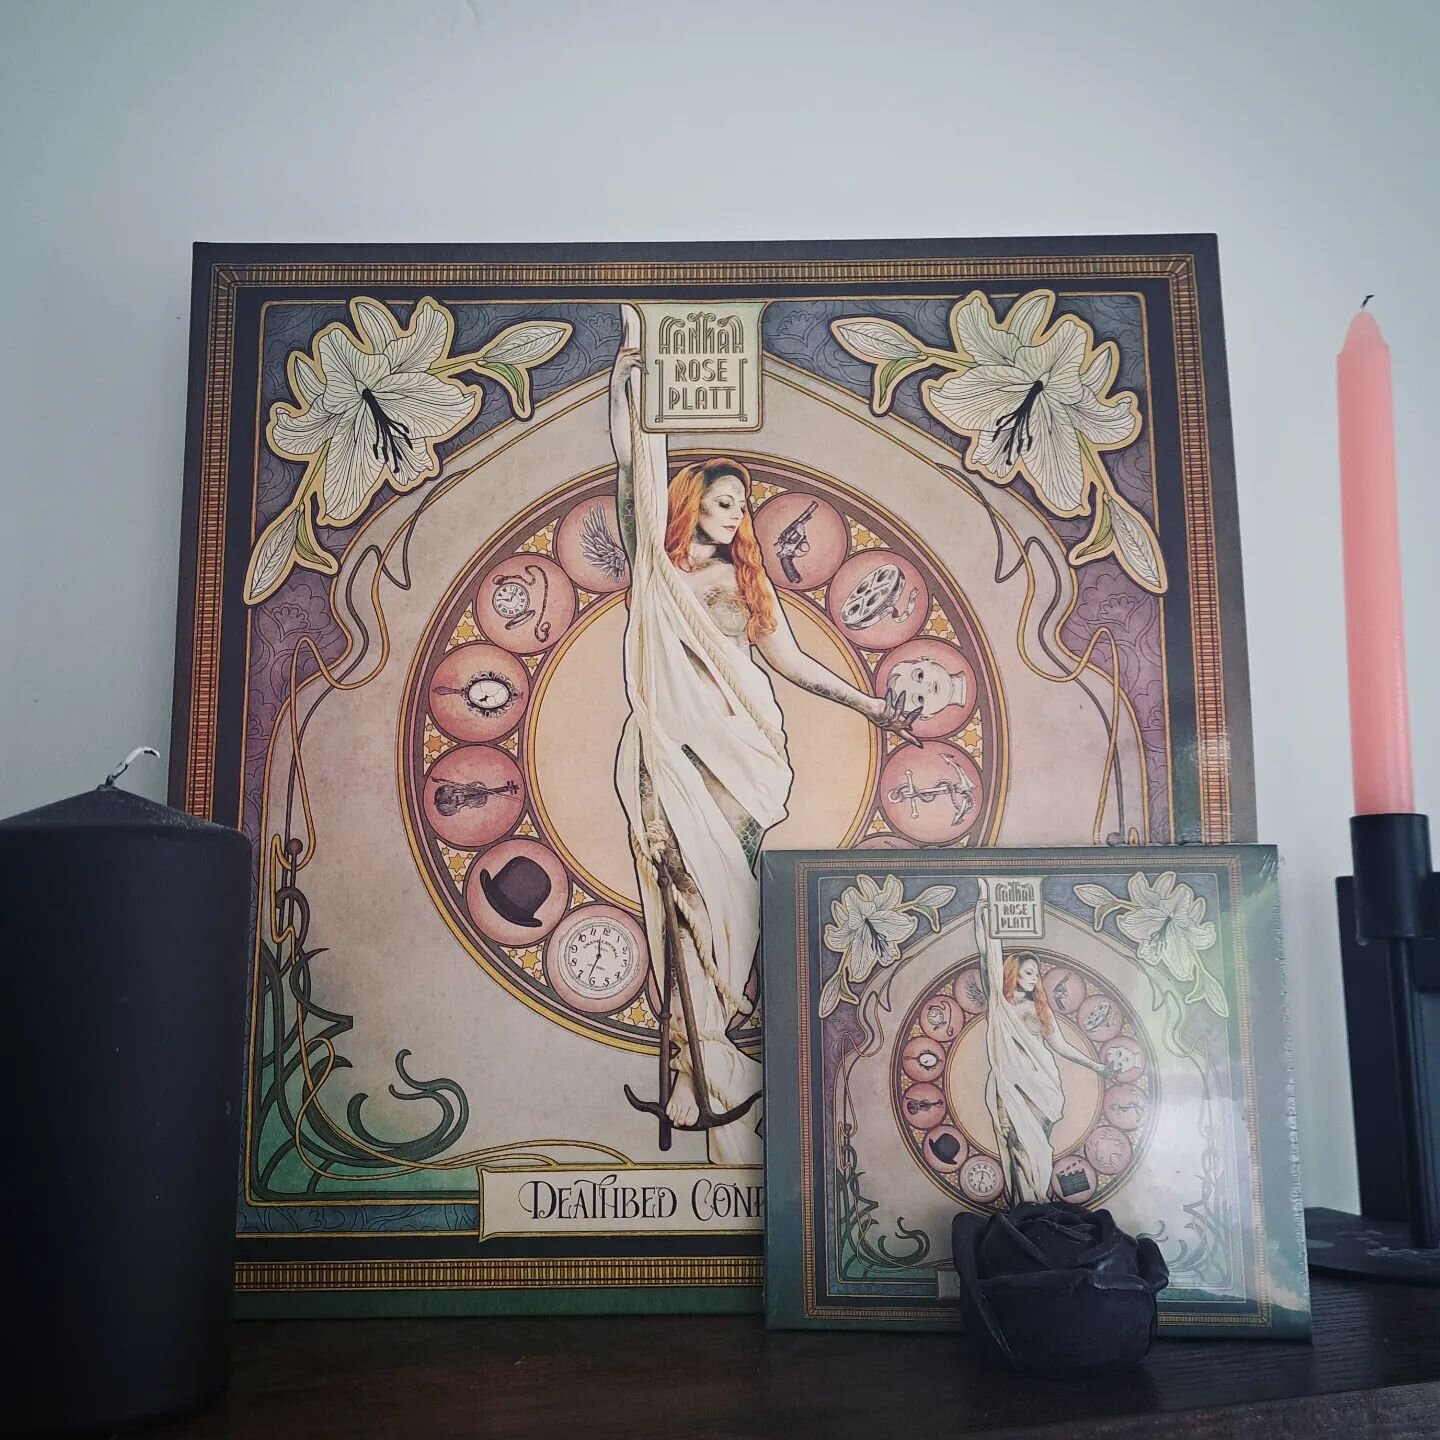 Two more sleeps till release day! We have beautiful gold gatefold vinyls, CDs and a ton of other beautiful &amp; exciting merch on the way! 

Still time to preorder your copy from the link in bio! 😃 👻 🧜&zwj;♀️

#deathbedconfessions #hannahroseplat